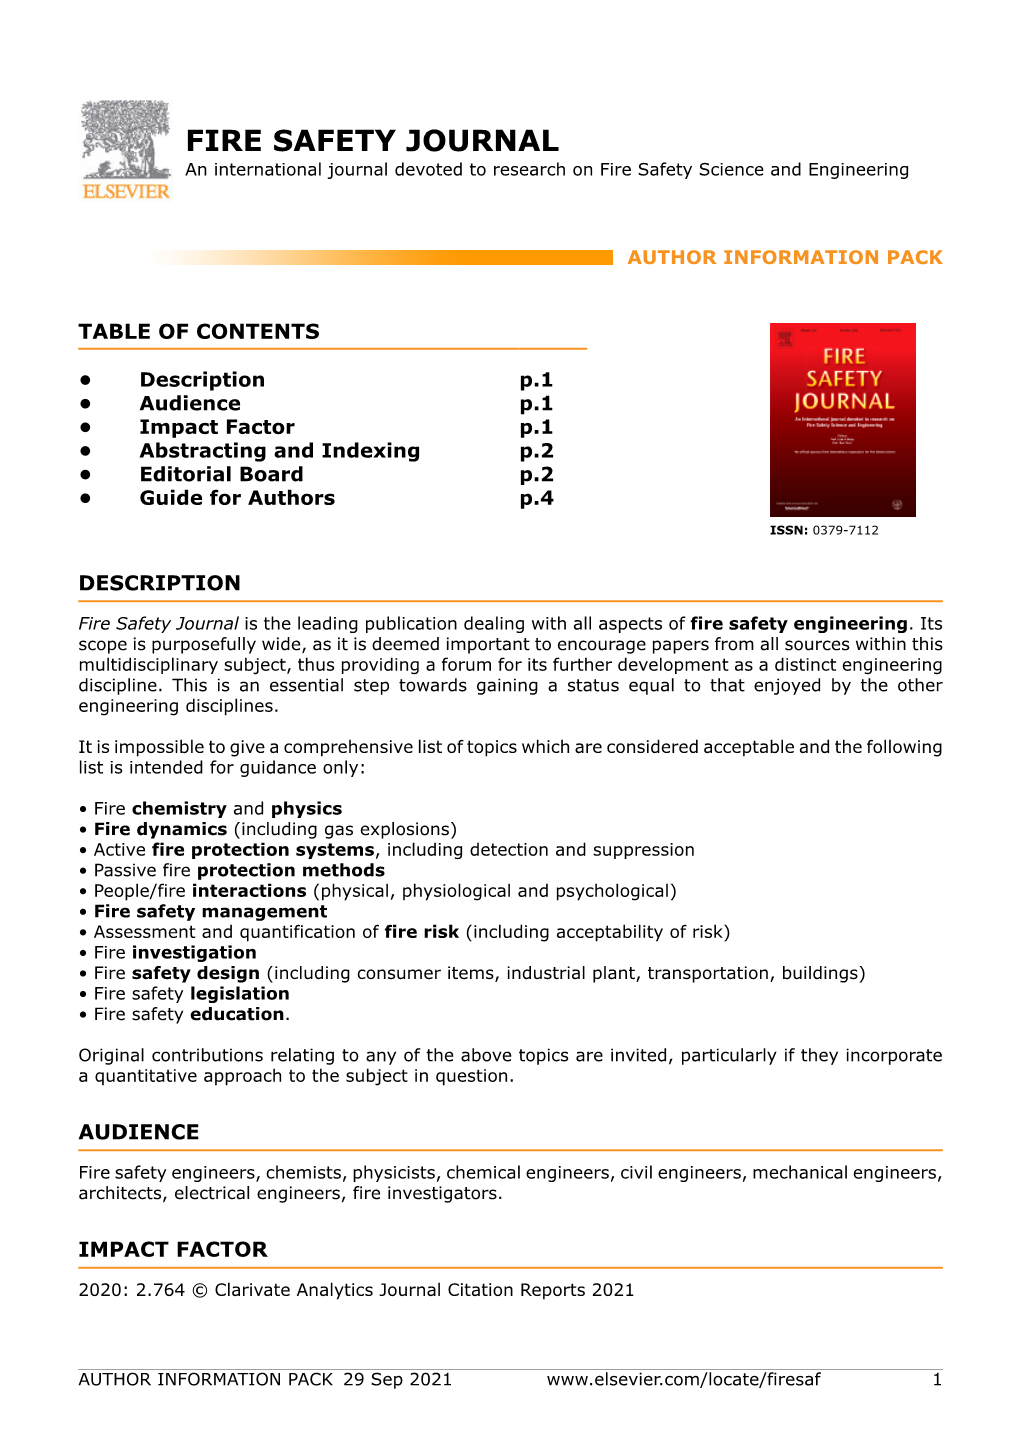 FIRE SAFETY JOURNAL an International Journal Devoted to Research on Fire Safety Science and Engineering